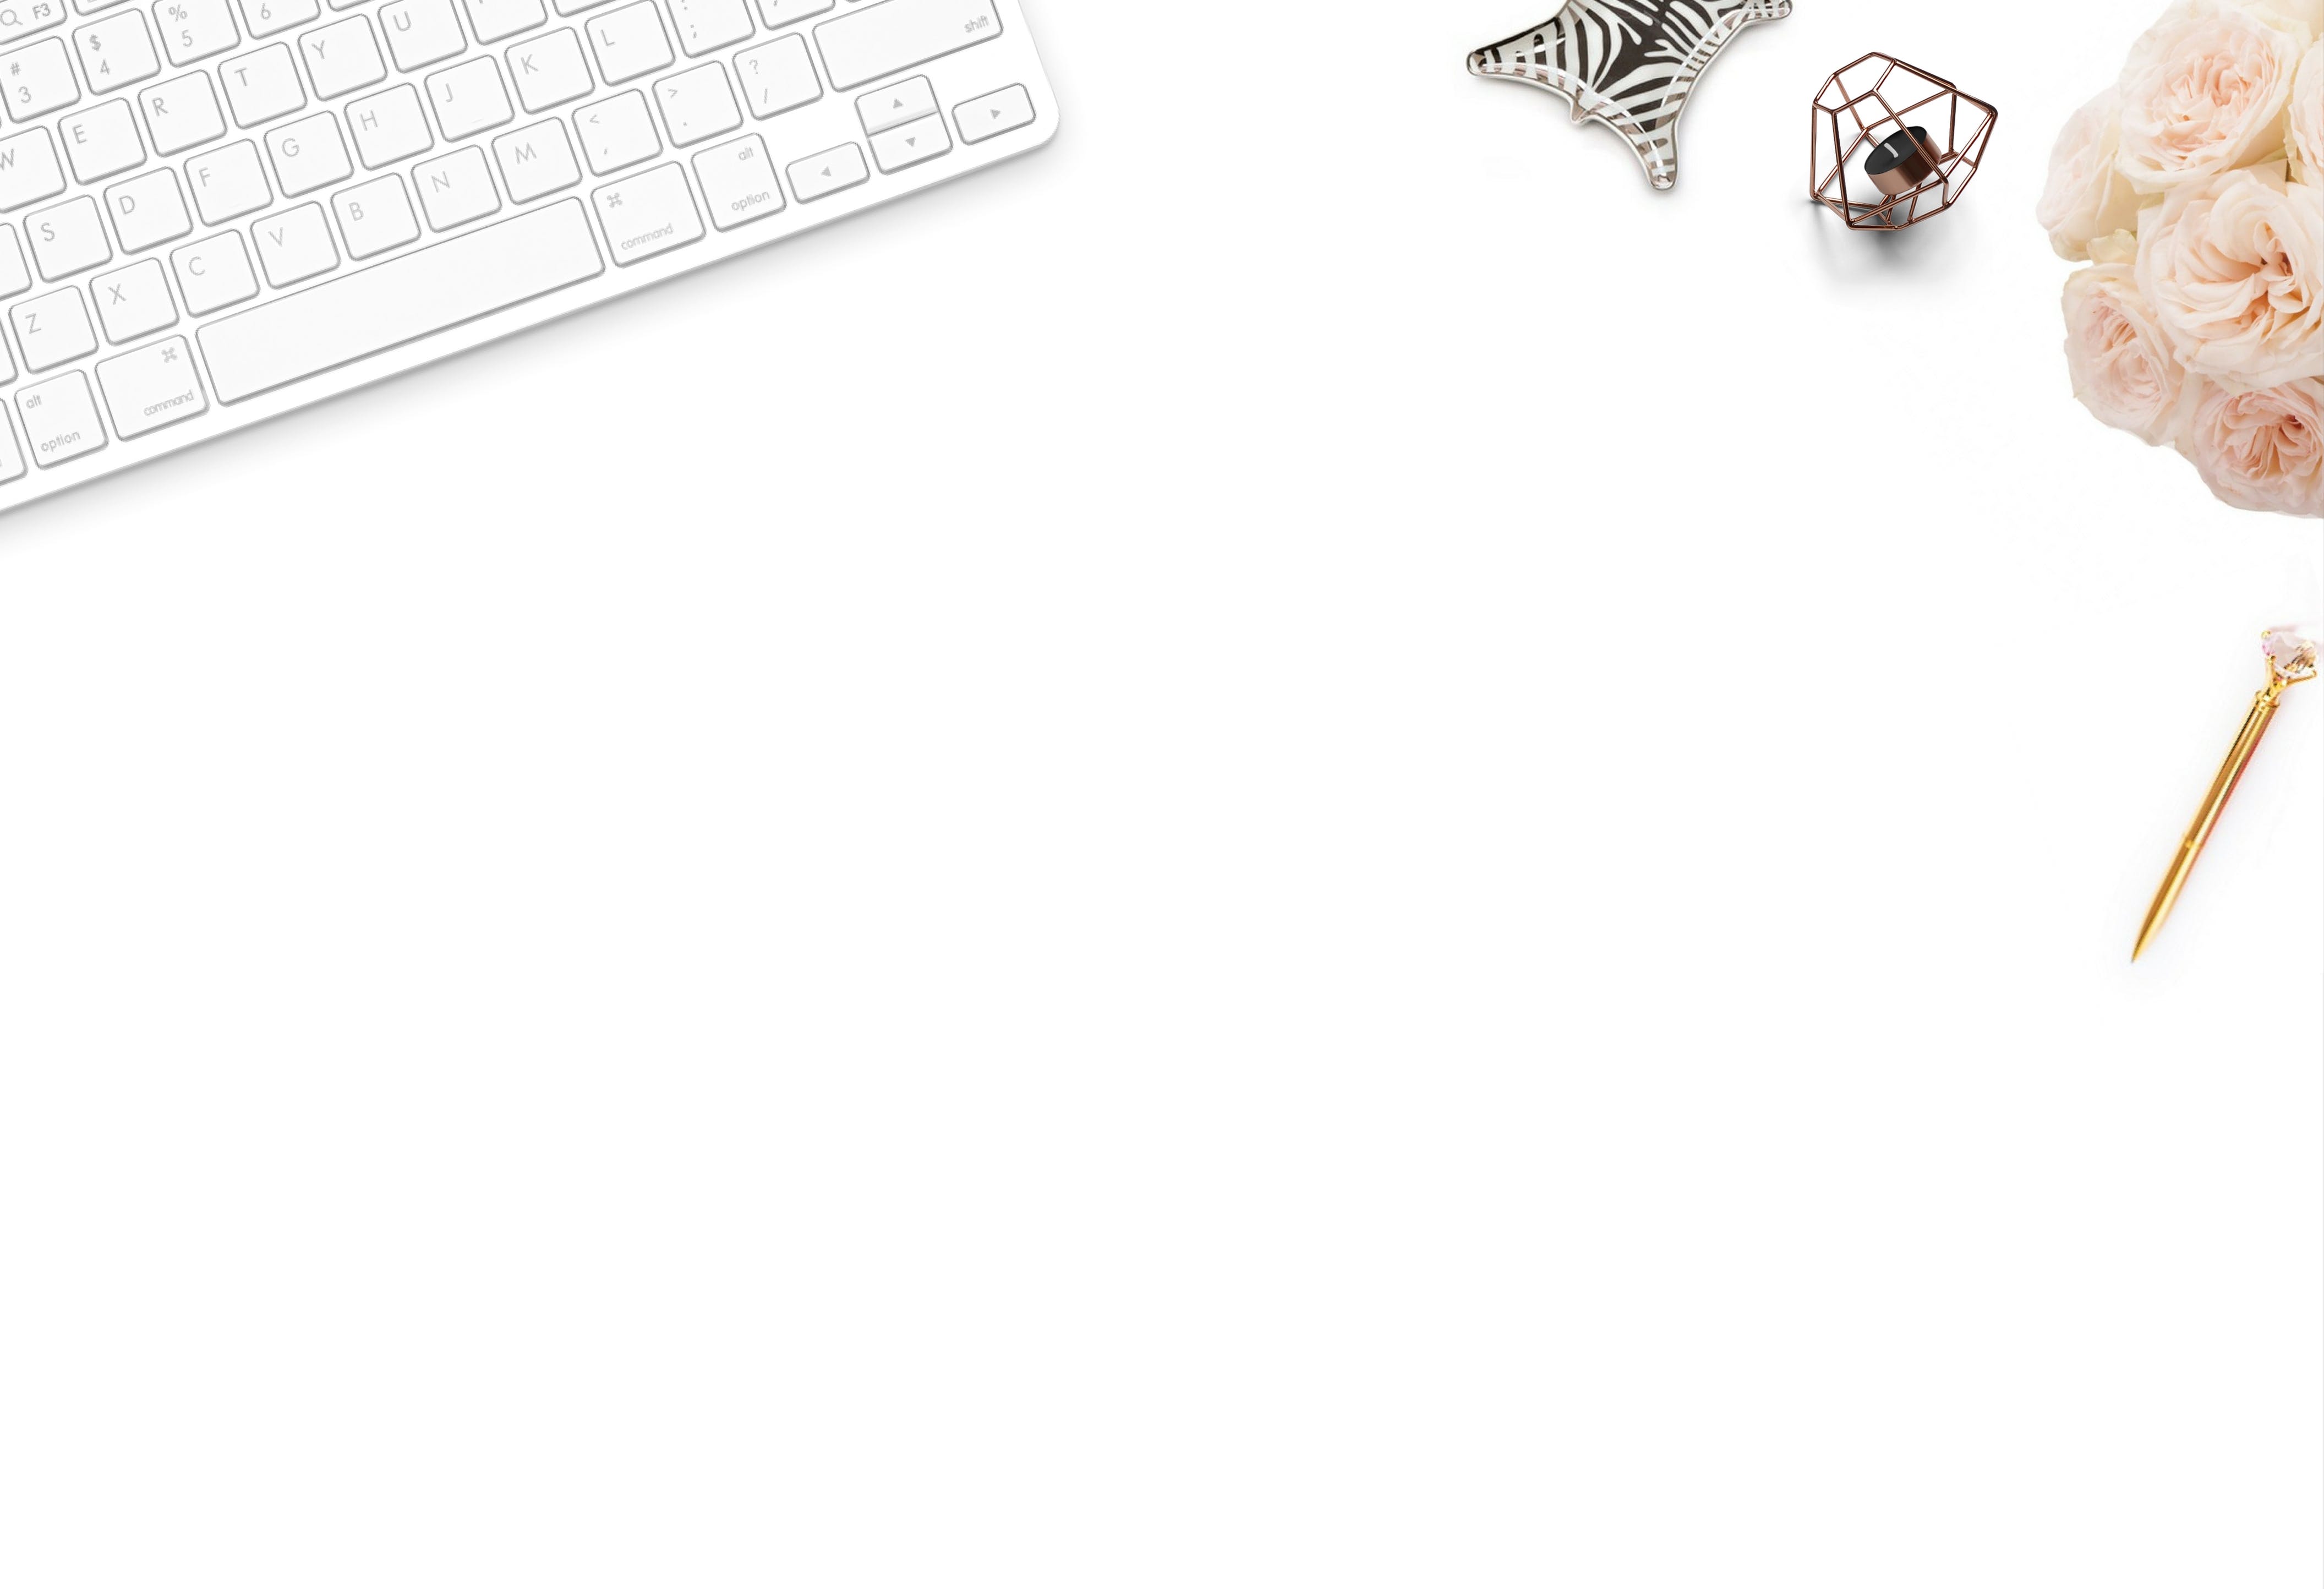 A white desk with a keyboard, mouse, and a vase of flowers. - Flat lay